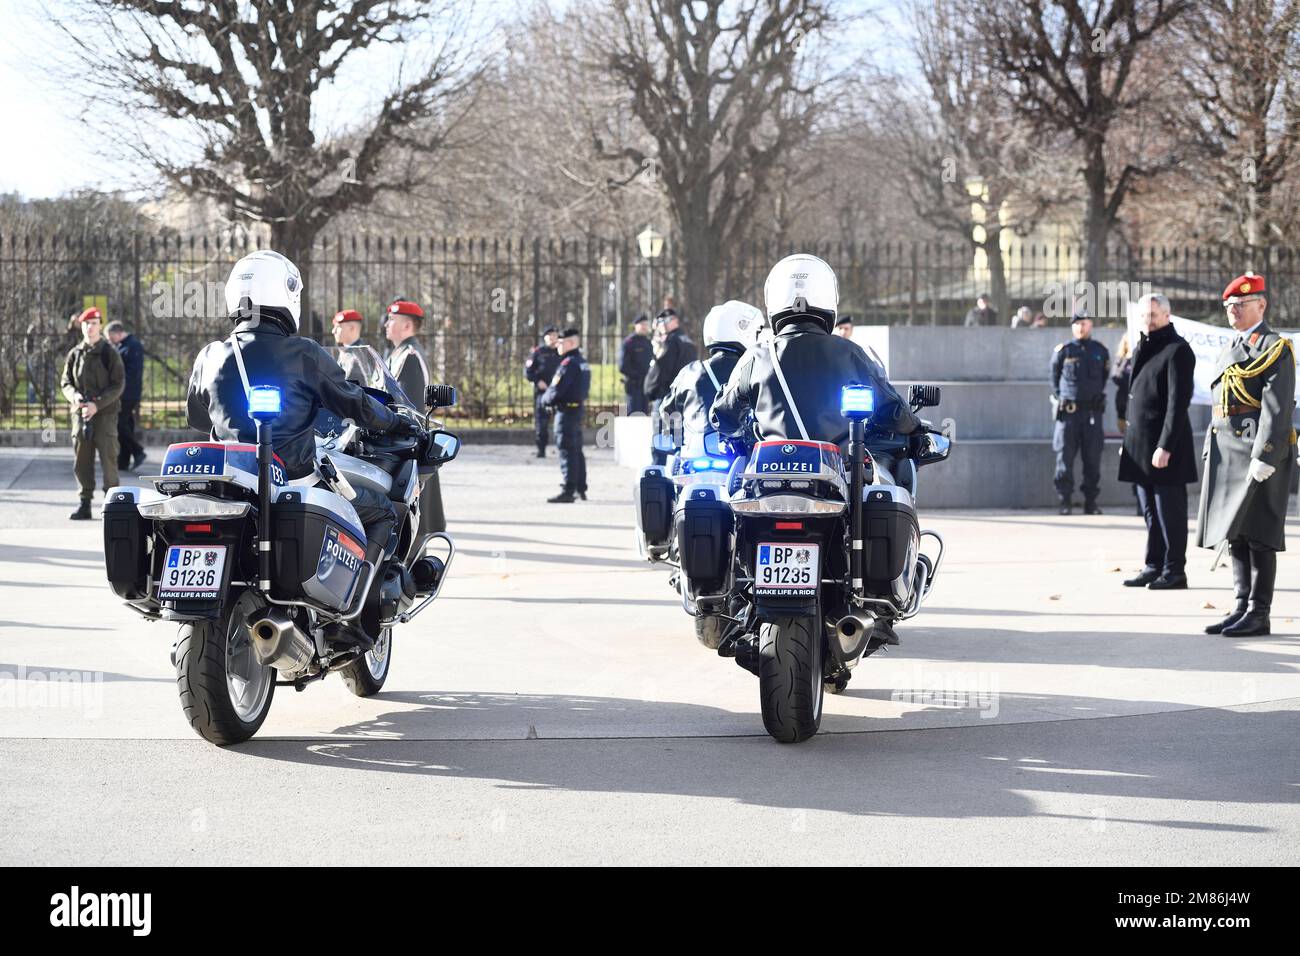 Official visit of the Prime Minister of the Republic of Kosovo. Picture shows motorized police Stock Photo